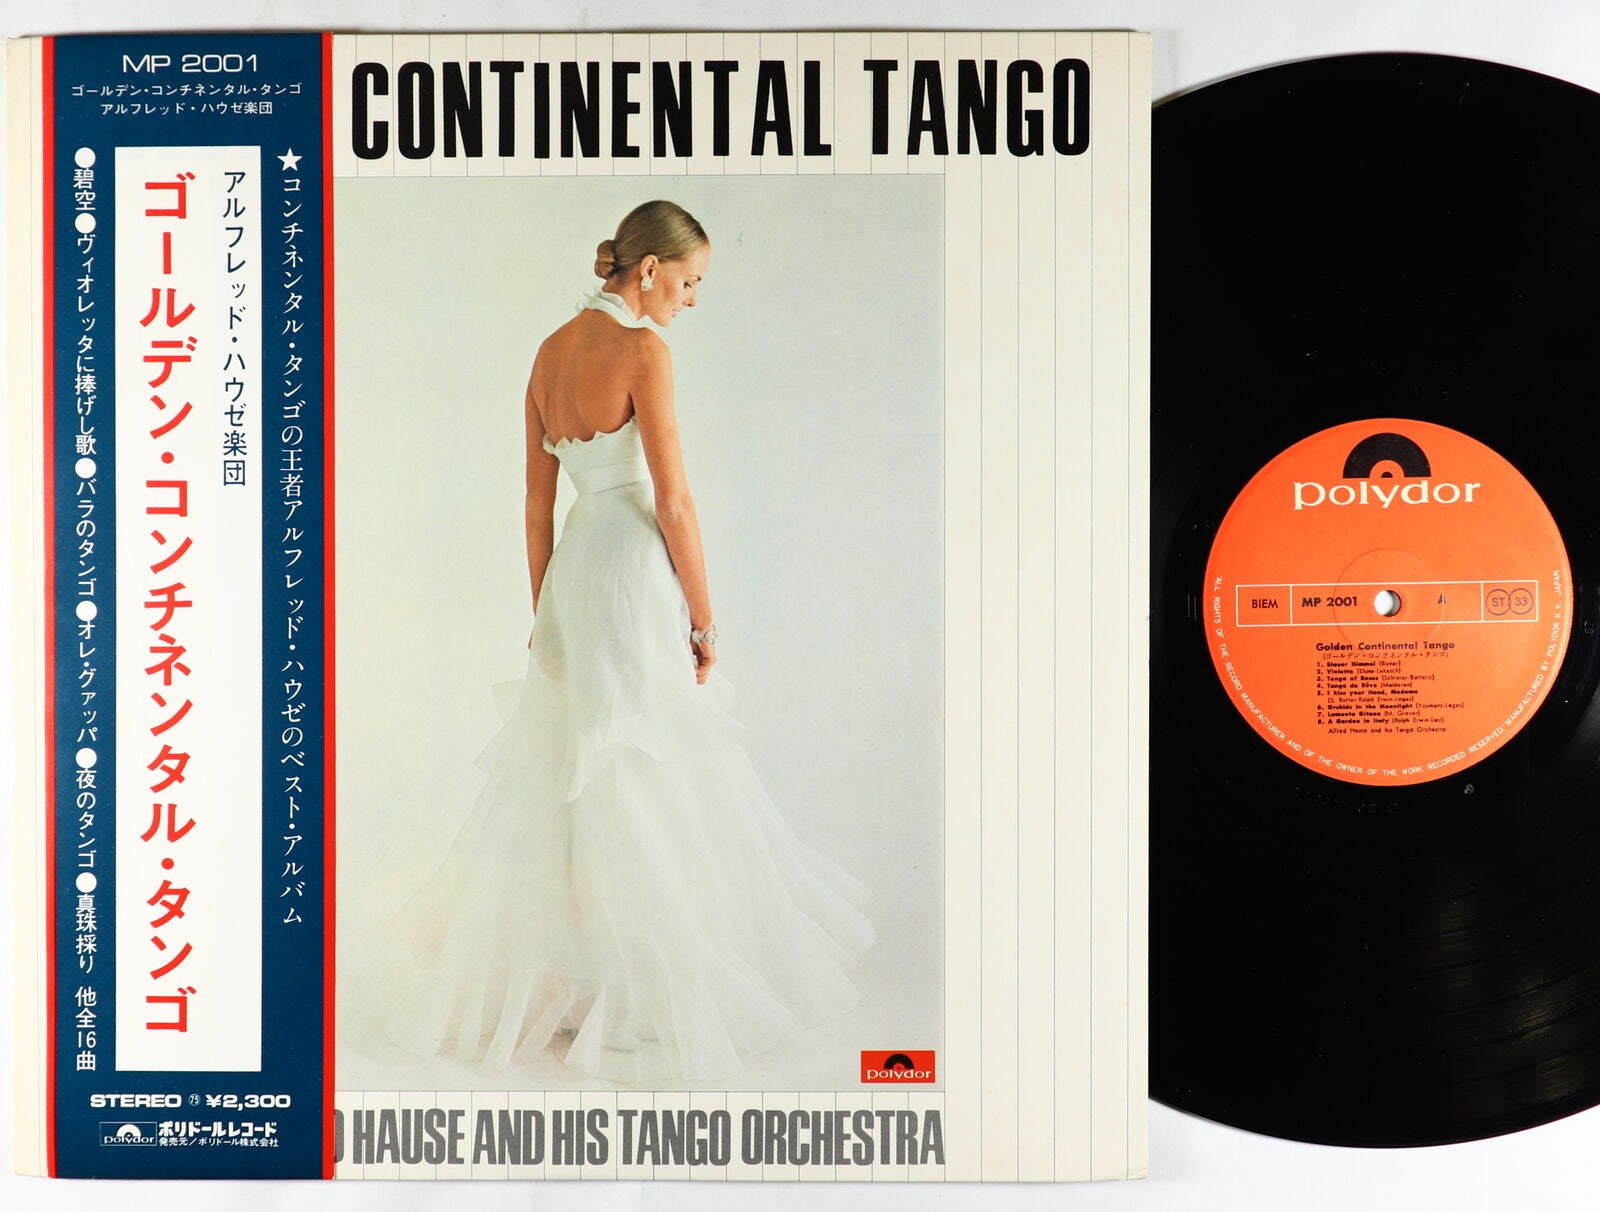 Alfred Hause And His Tango Orchestra ‎– Golden Continental Tango (1968) - Mint- Lp Record 1971 Polydor Japan Import Vinyl, Inserts & OBI - Latin Jazz